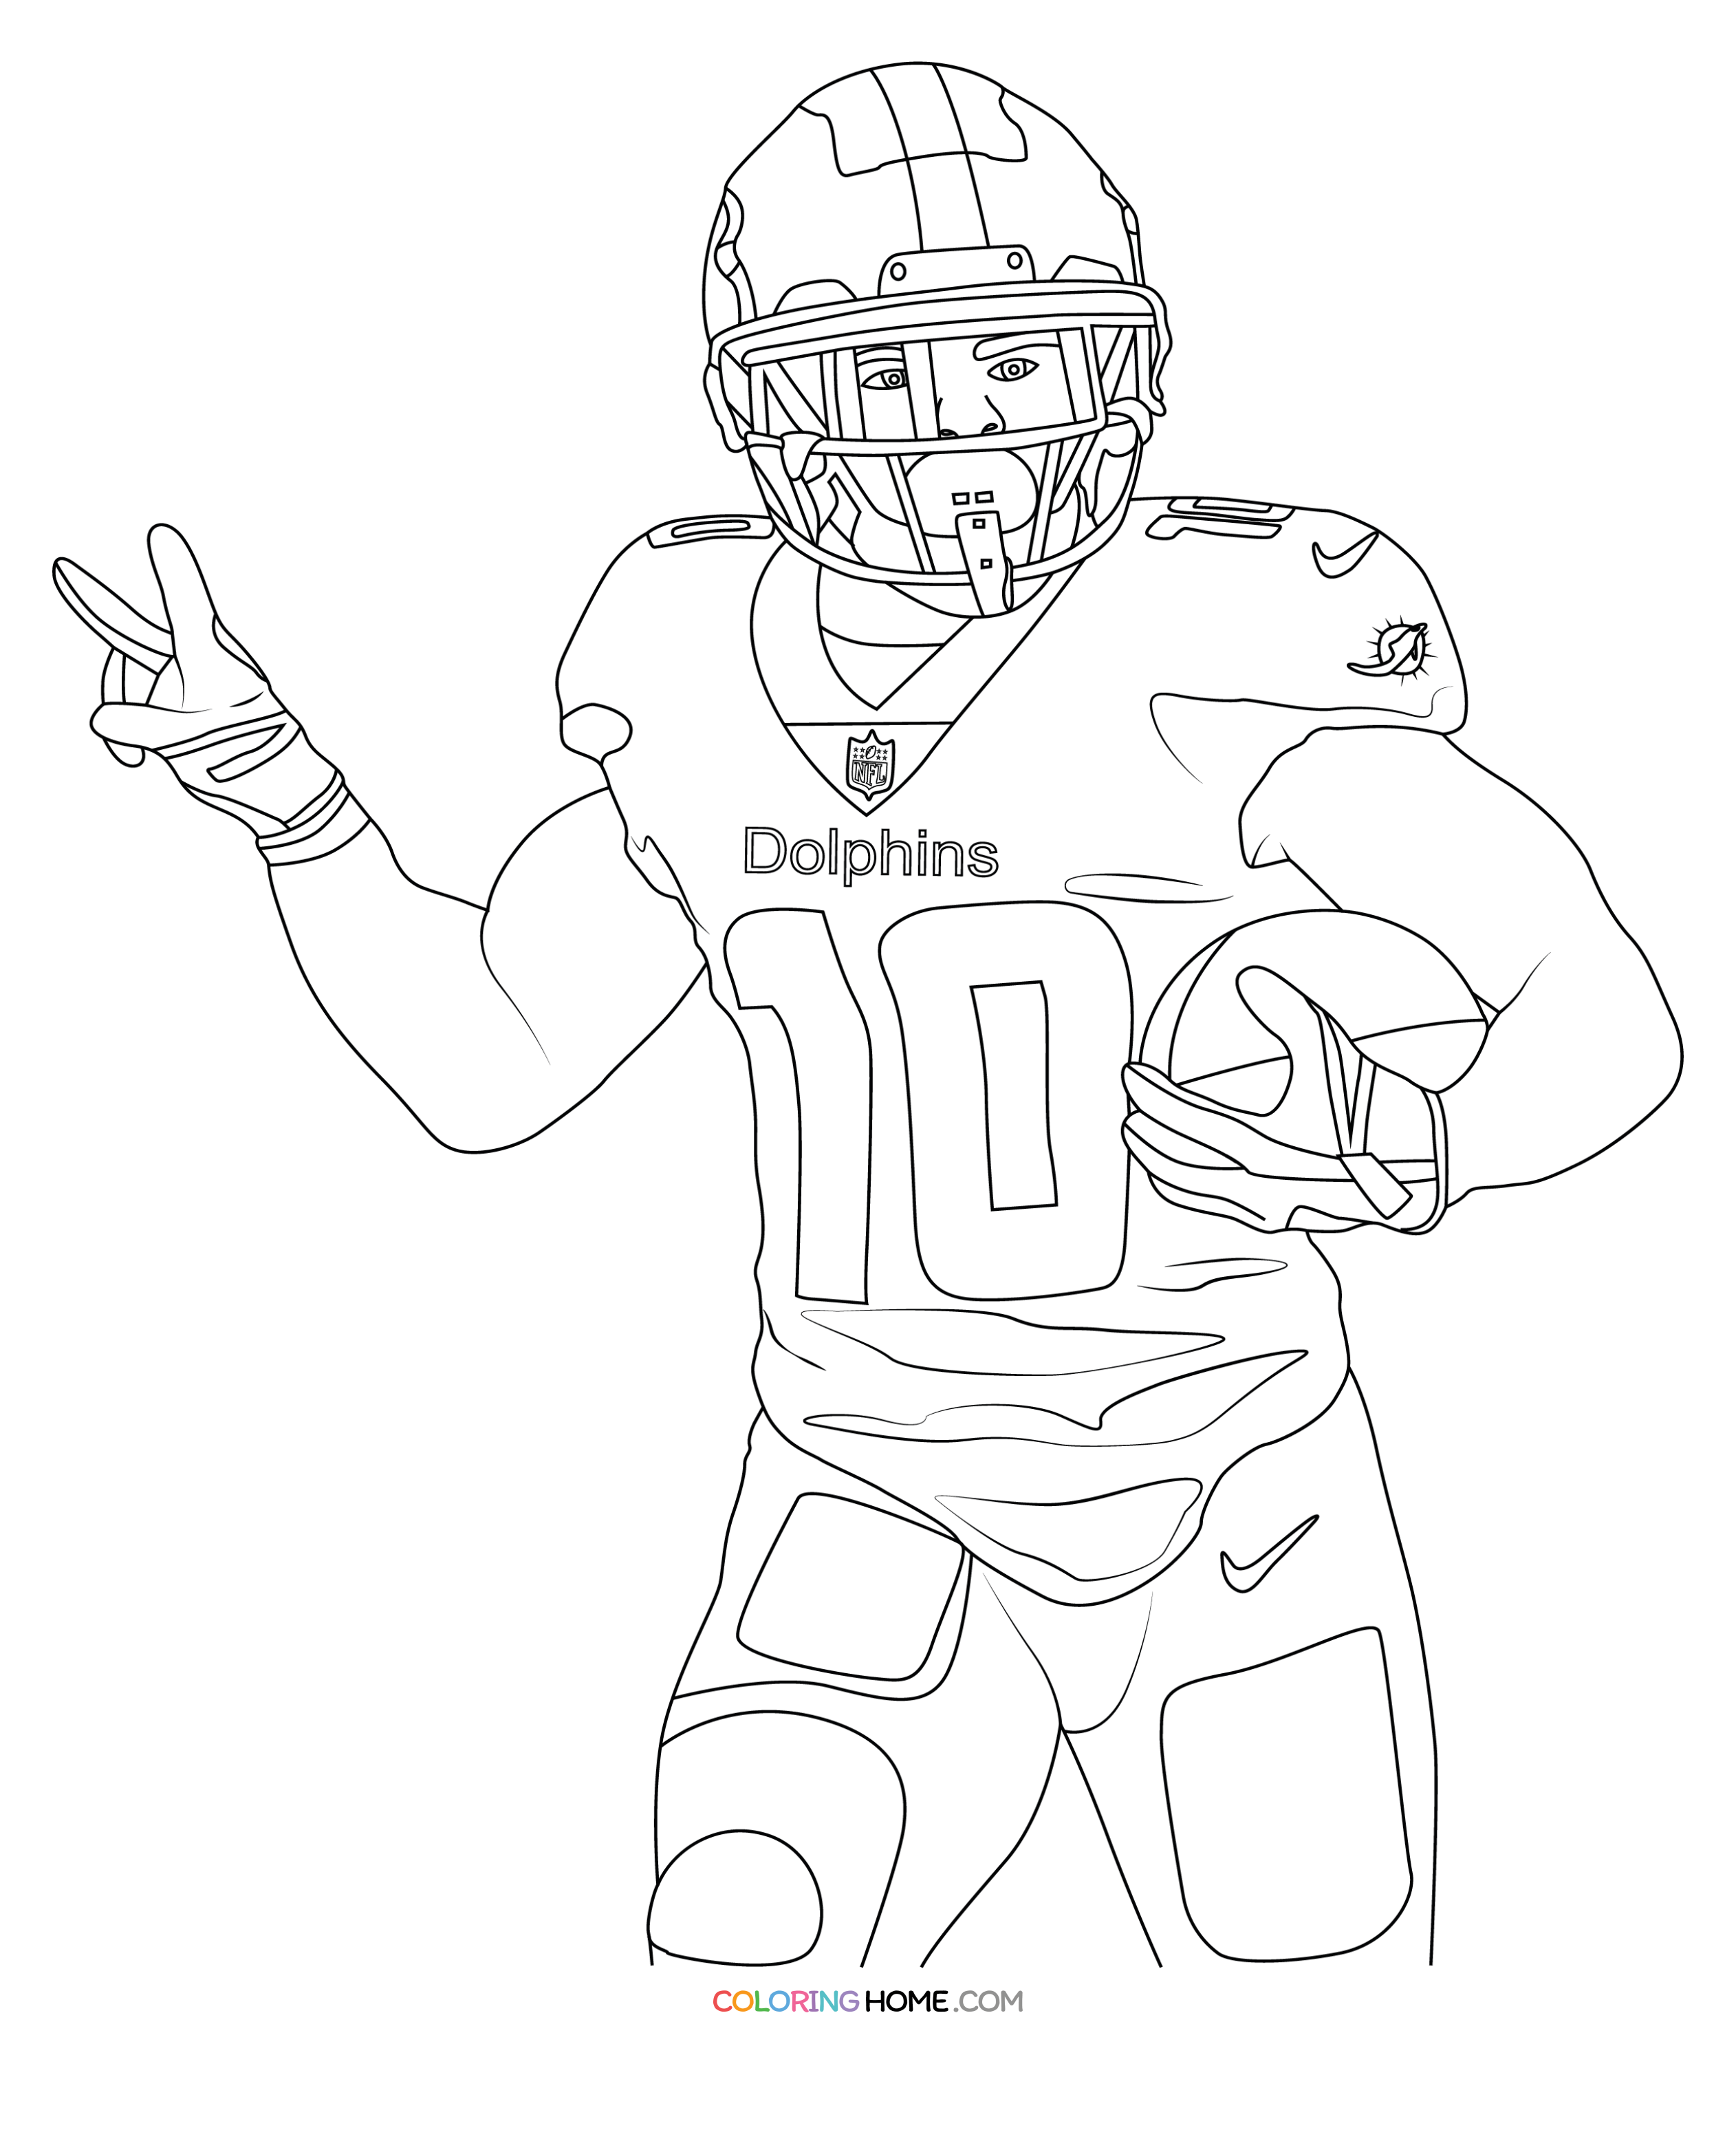 Tyreek Hill NFL coloring page